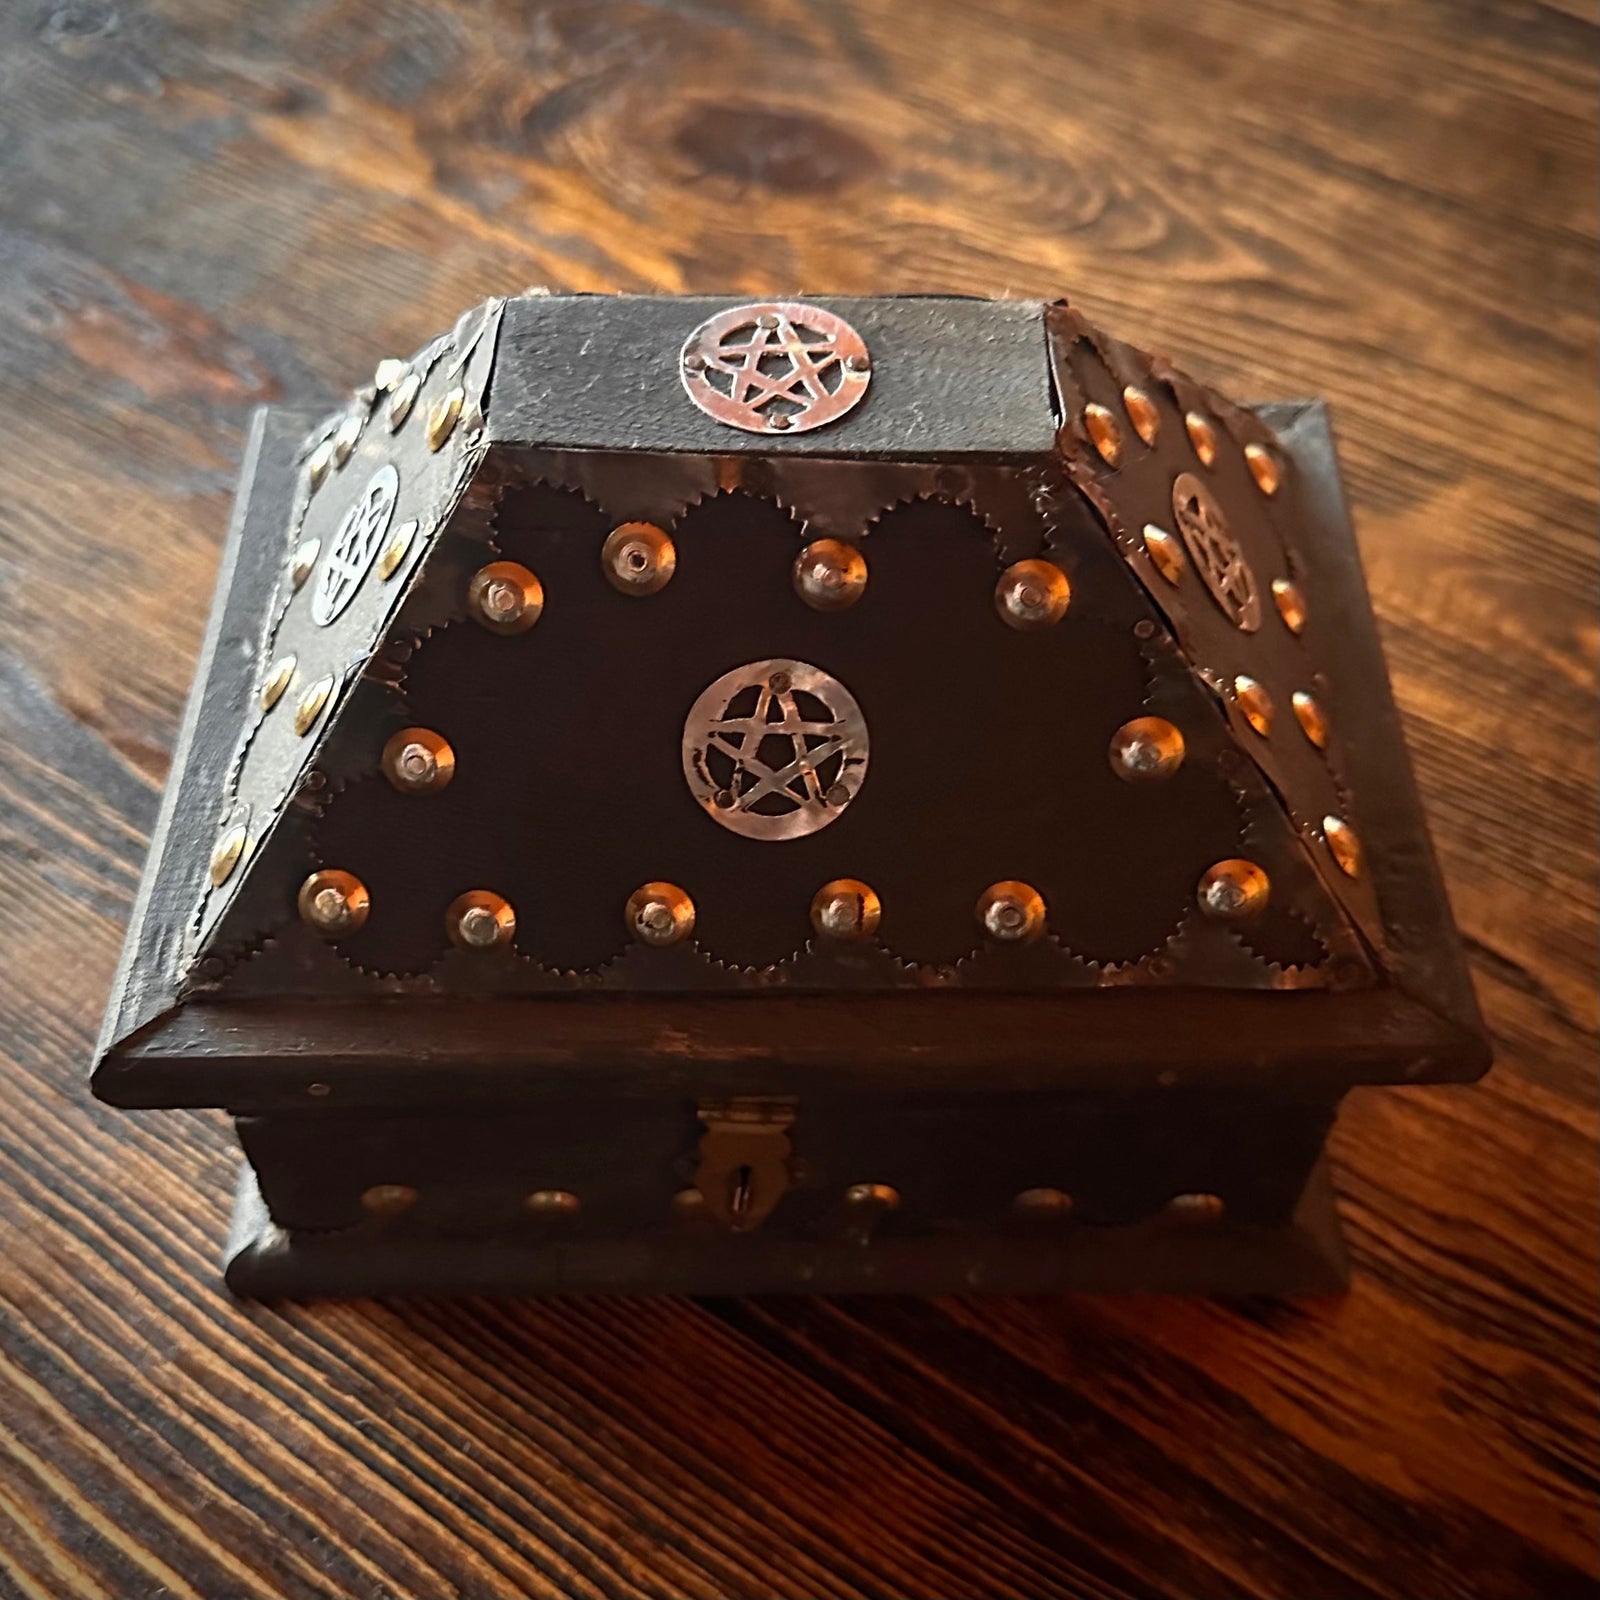 Black Pentacle Inlay Wood Chest